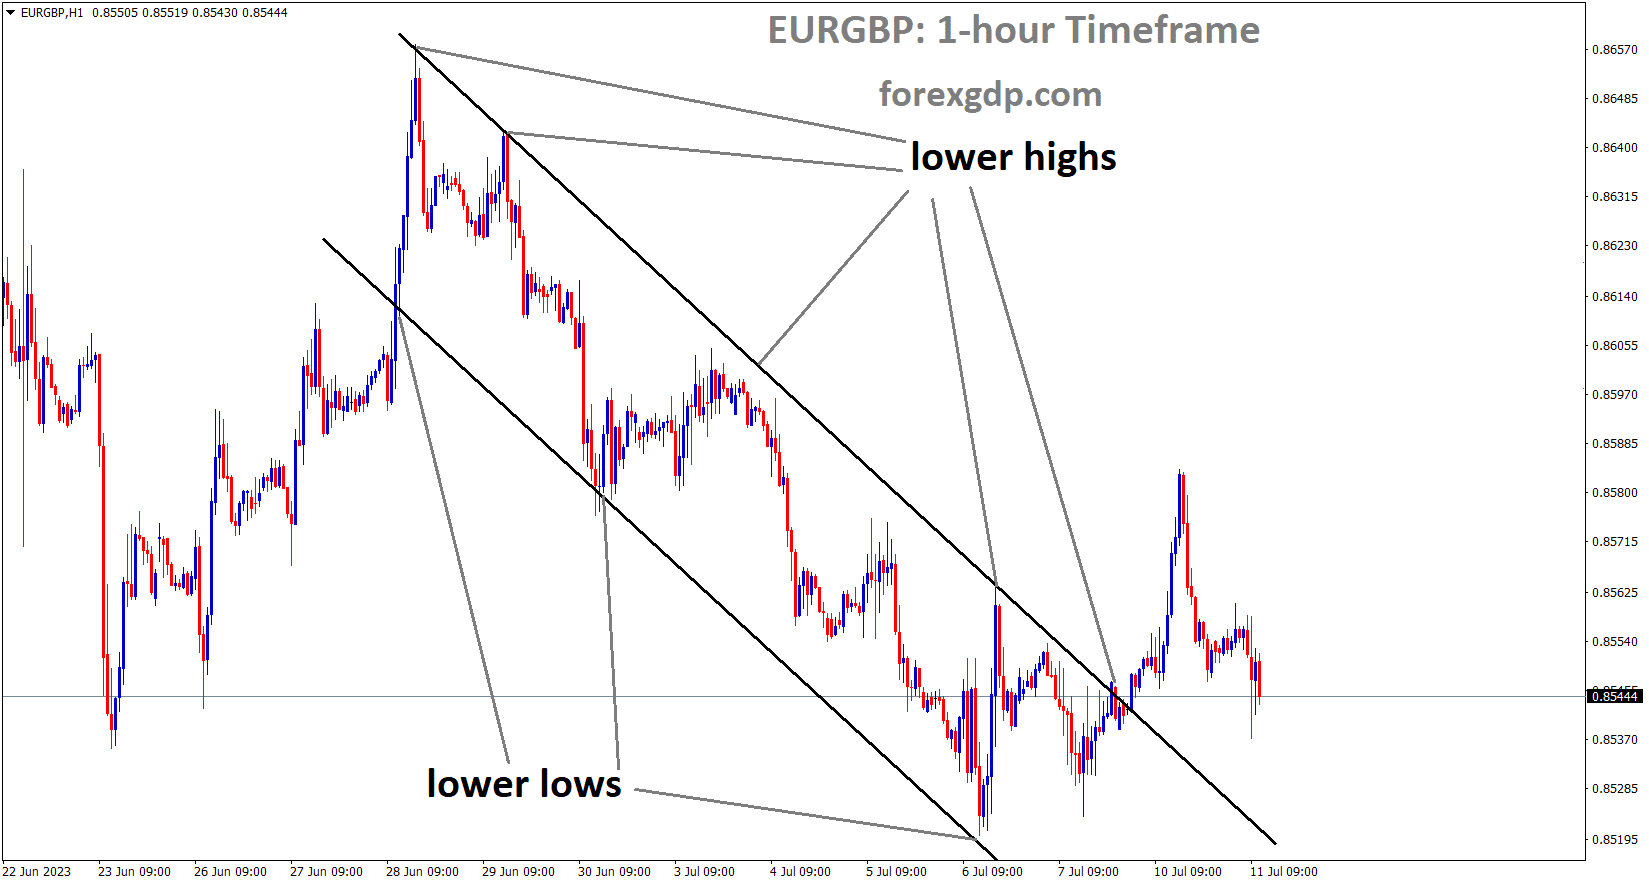 EURGBP is moving in the Descending channel and the market has reached the lower high area of the channel 1